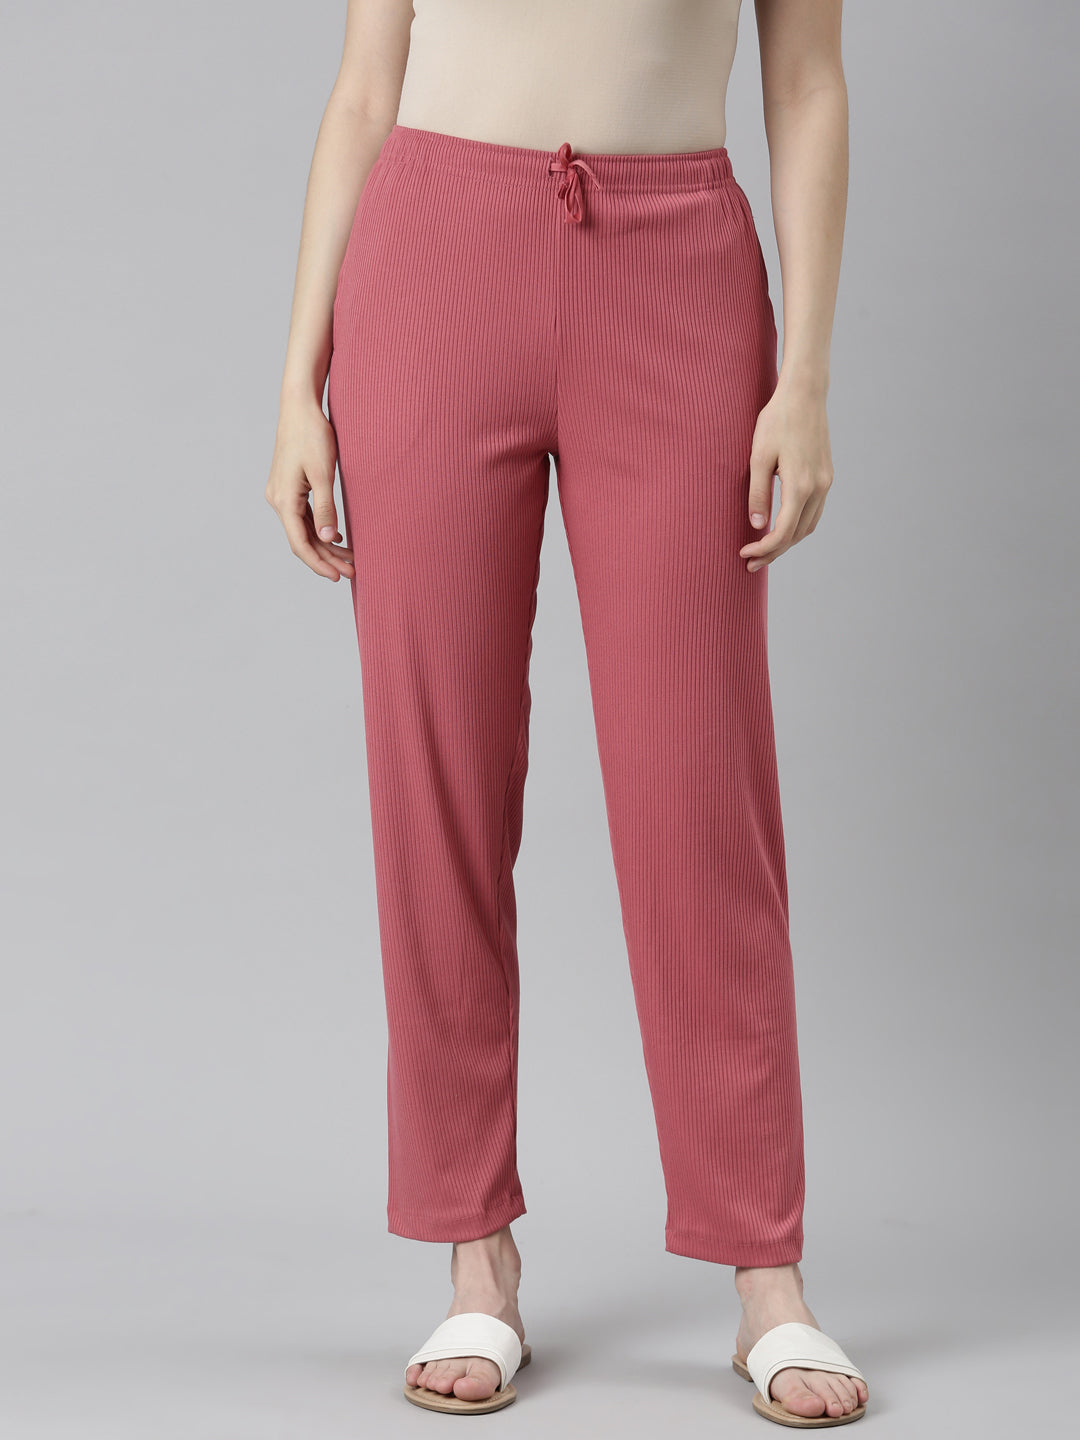 Women Solid Rusty Pink Mid Rise Casual Rib Pants